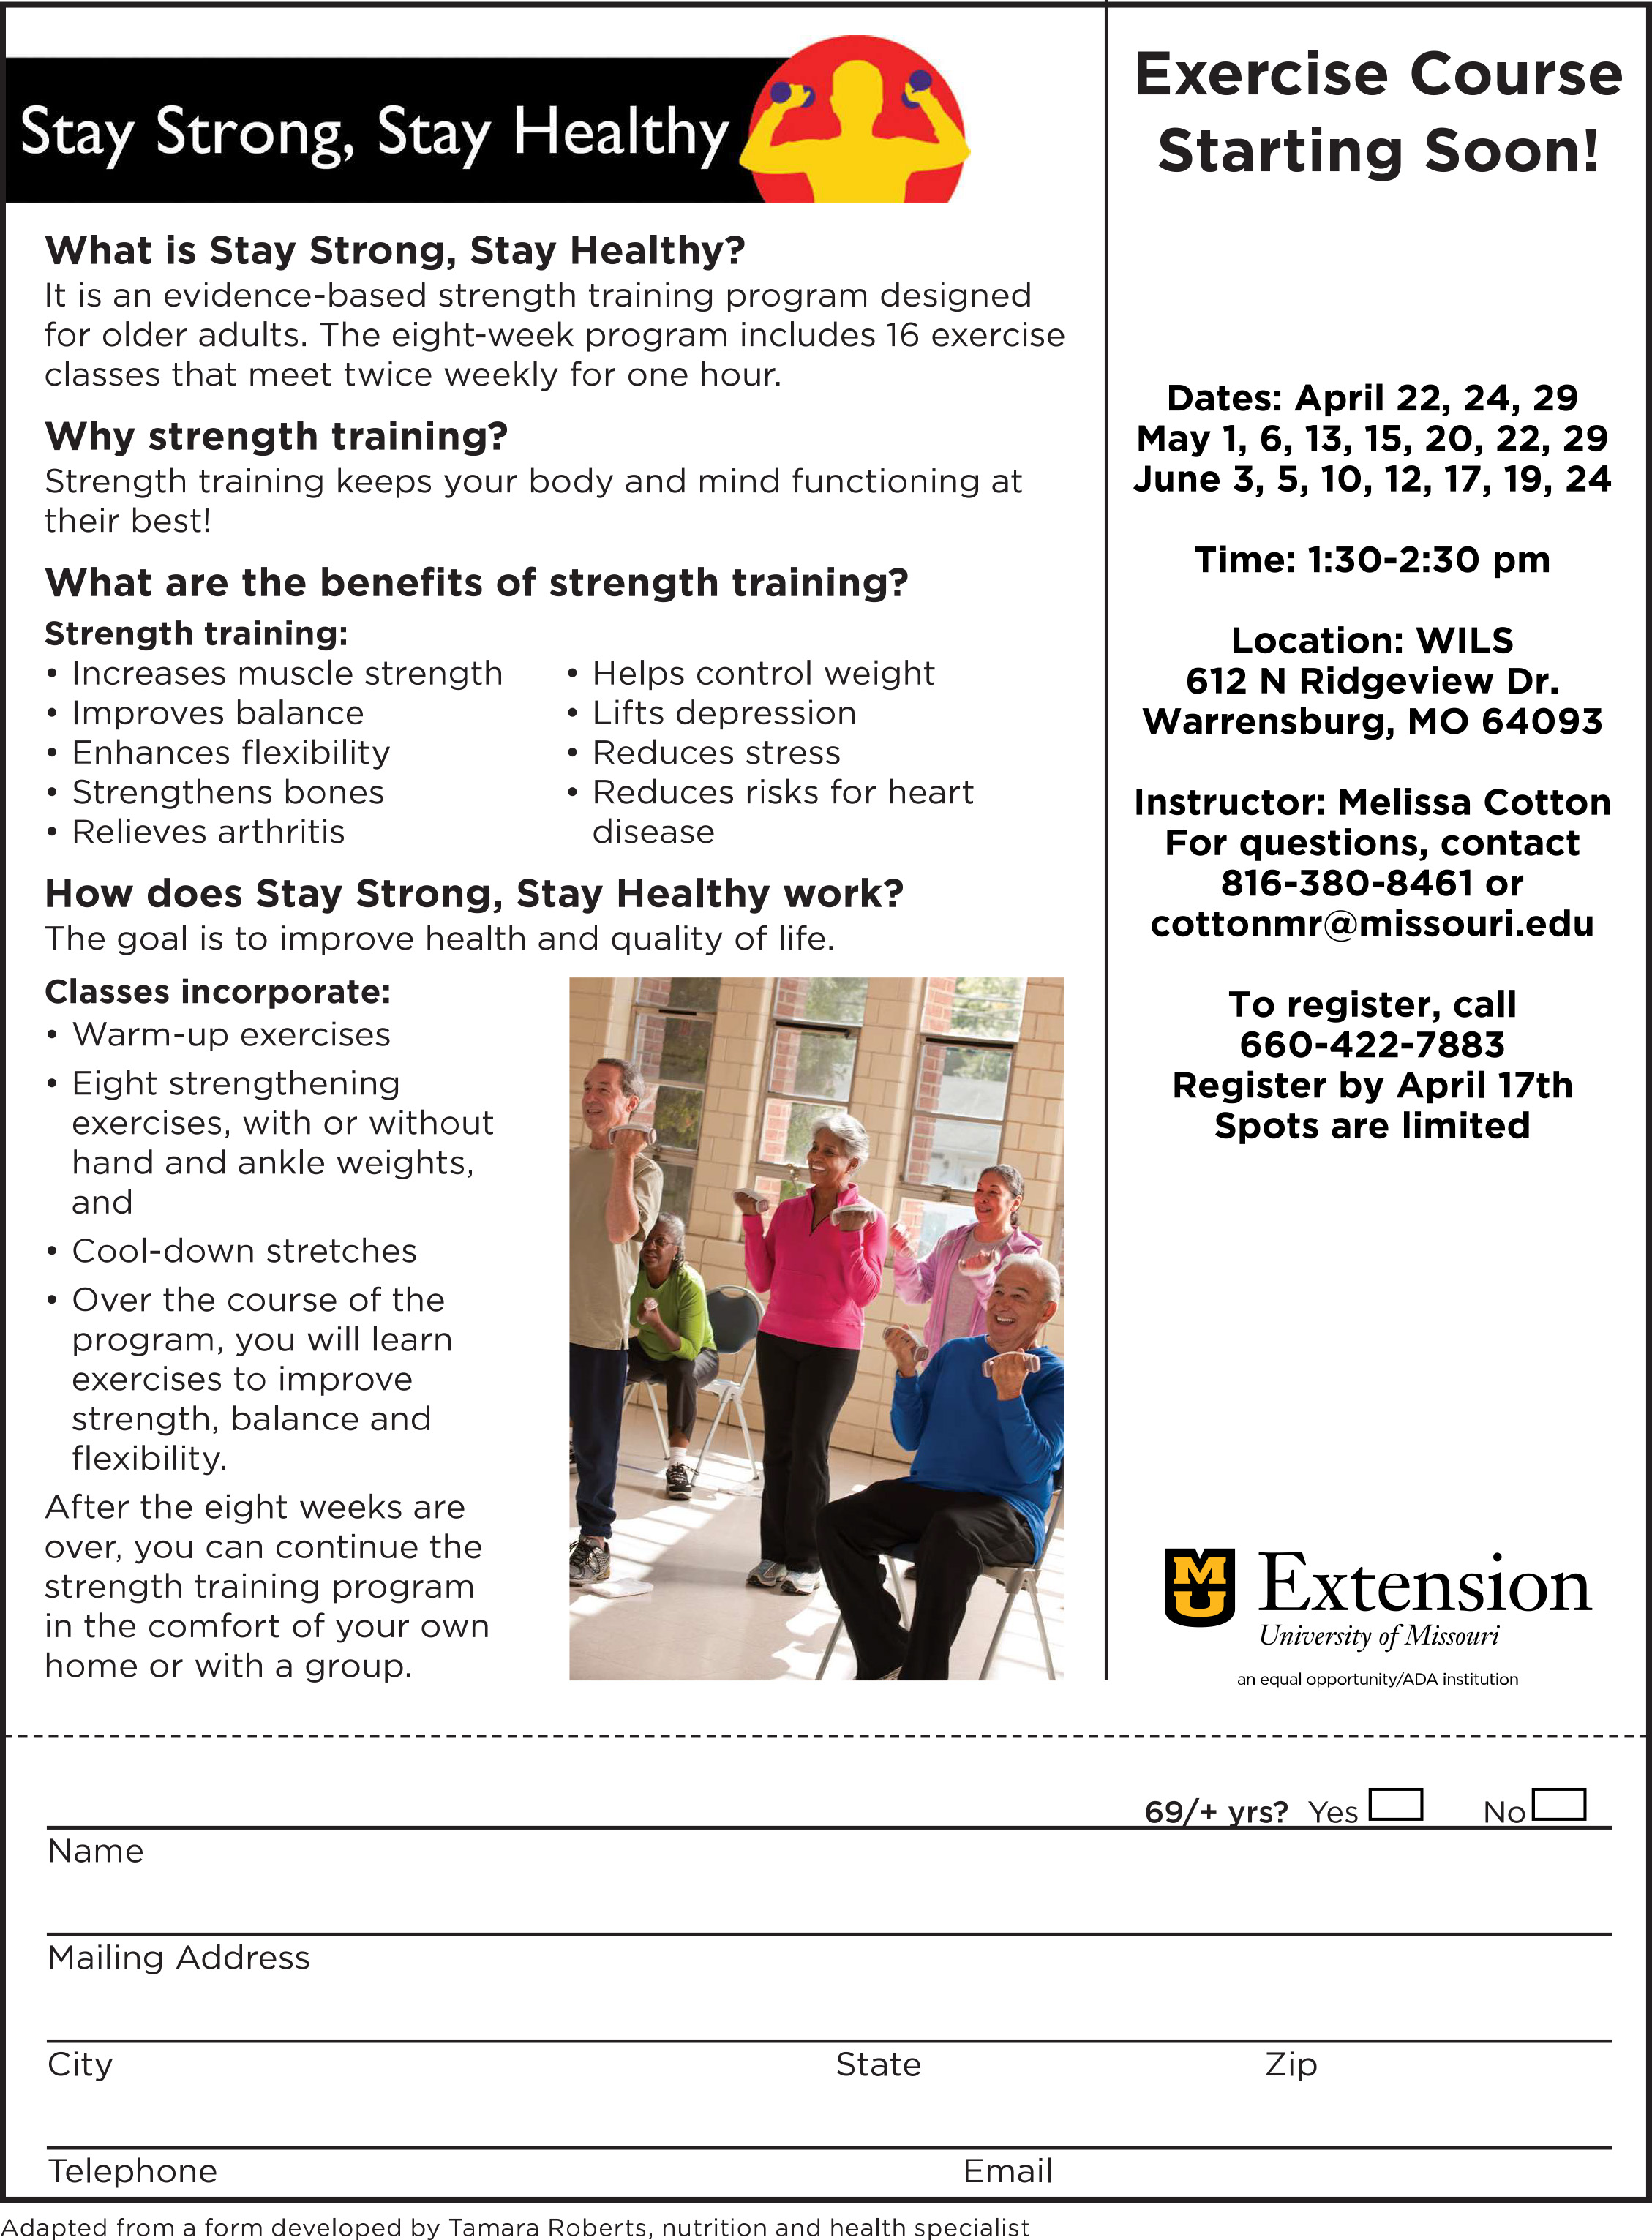 MU Extension Stay Strong, Stay Healthy Exercise Program. Call 660-422-7883 to register.